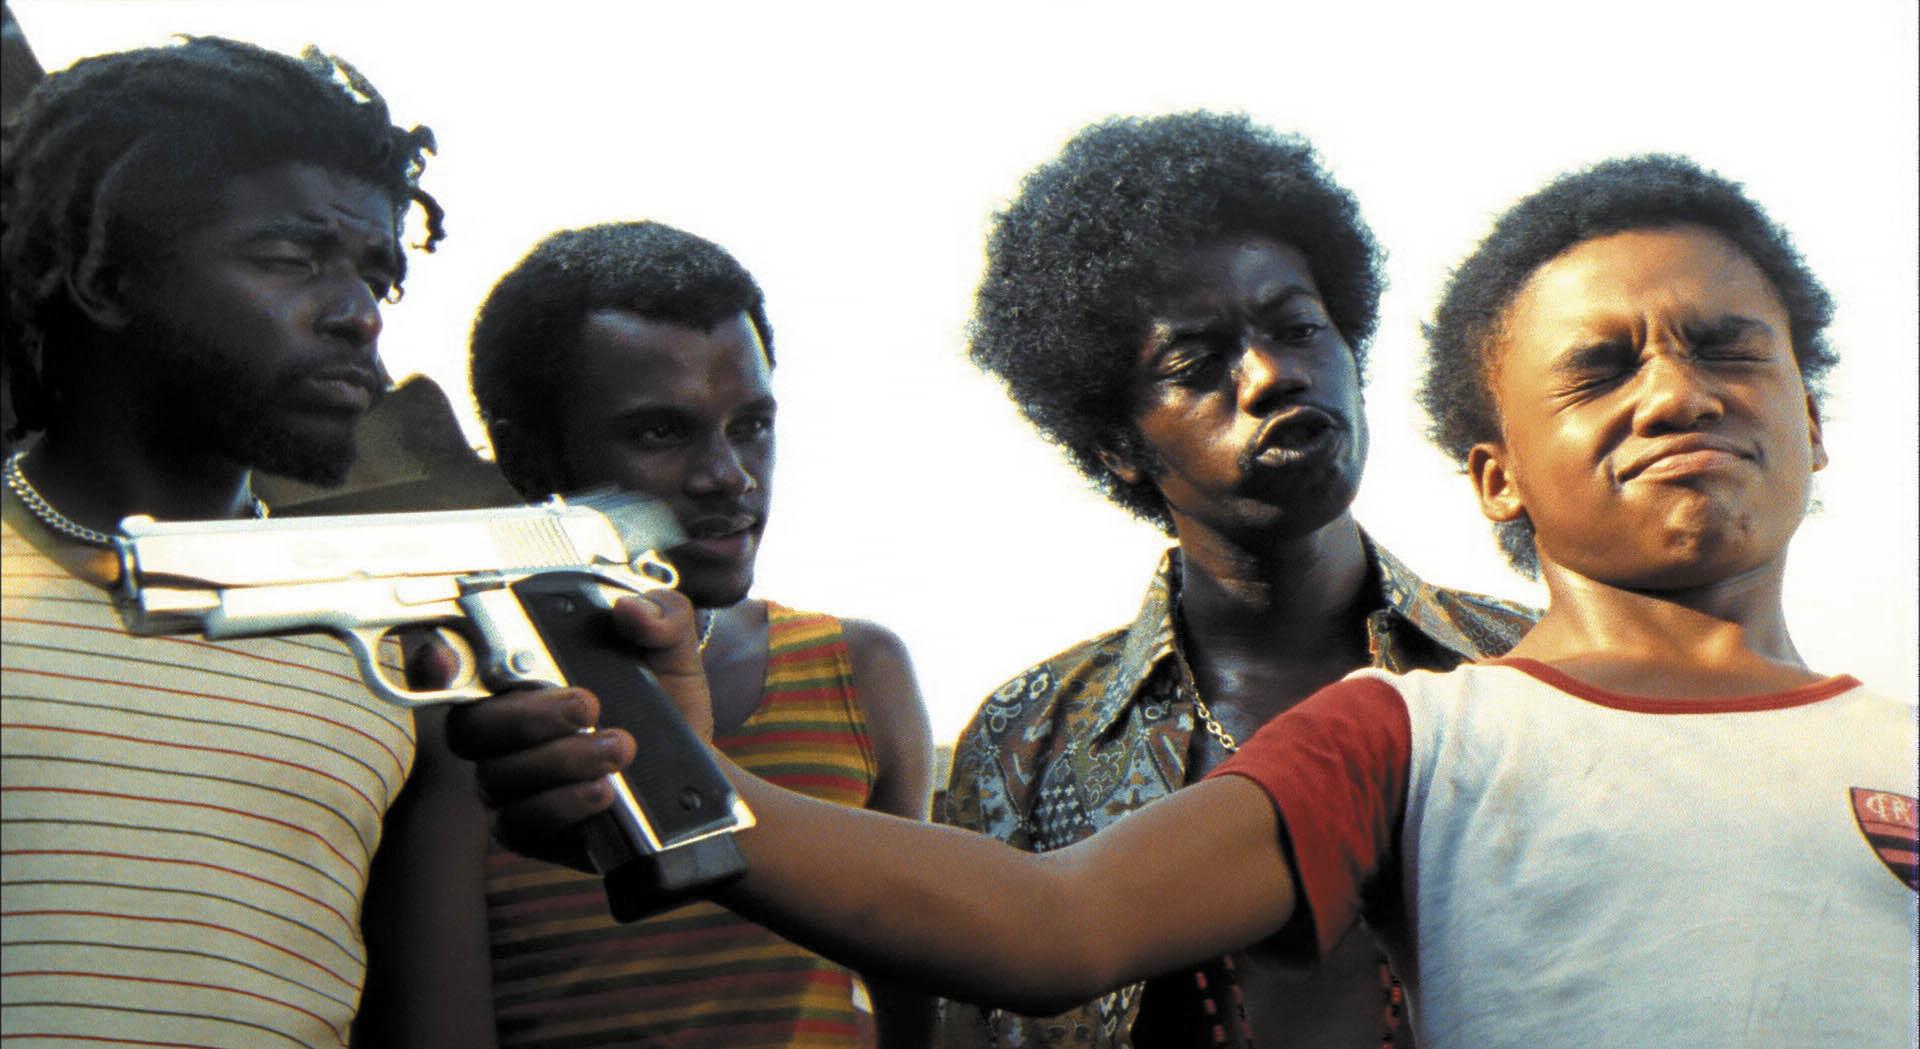 Pin City Of God (2002) Movie and Pictures on Pinterest